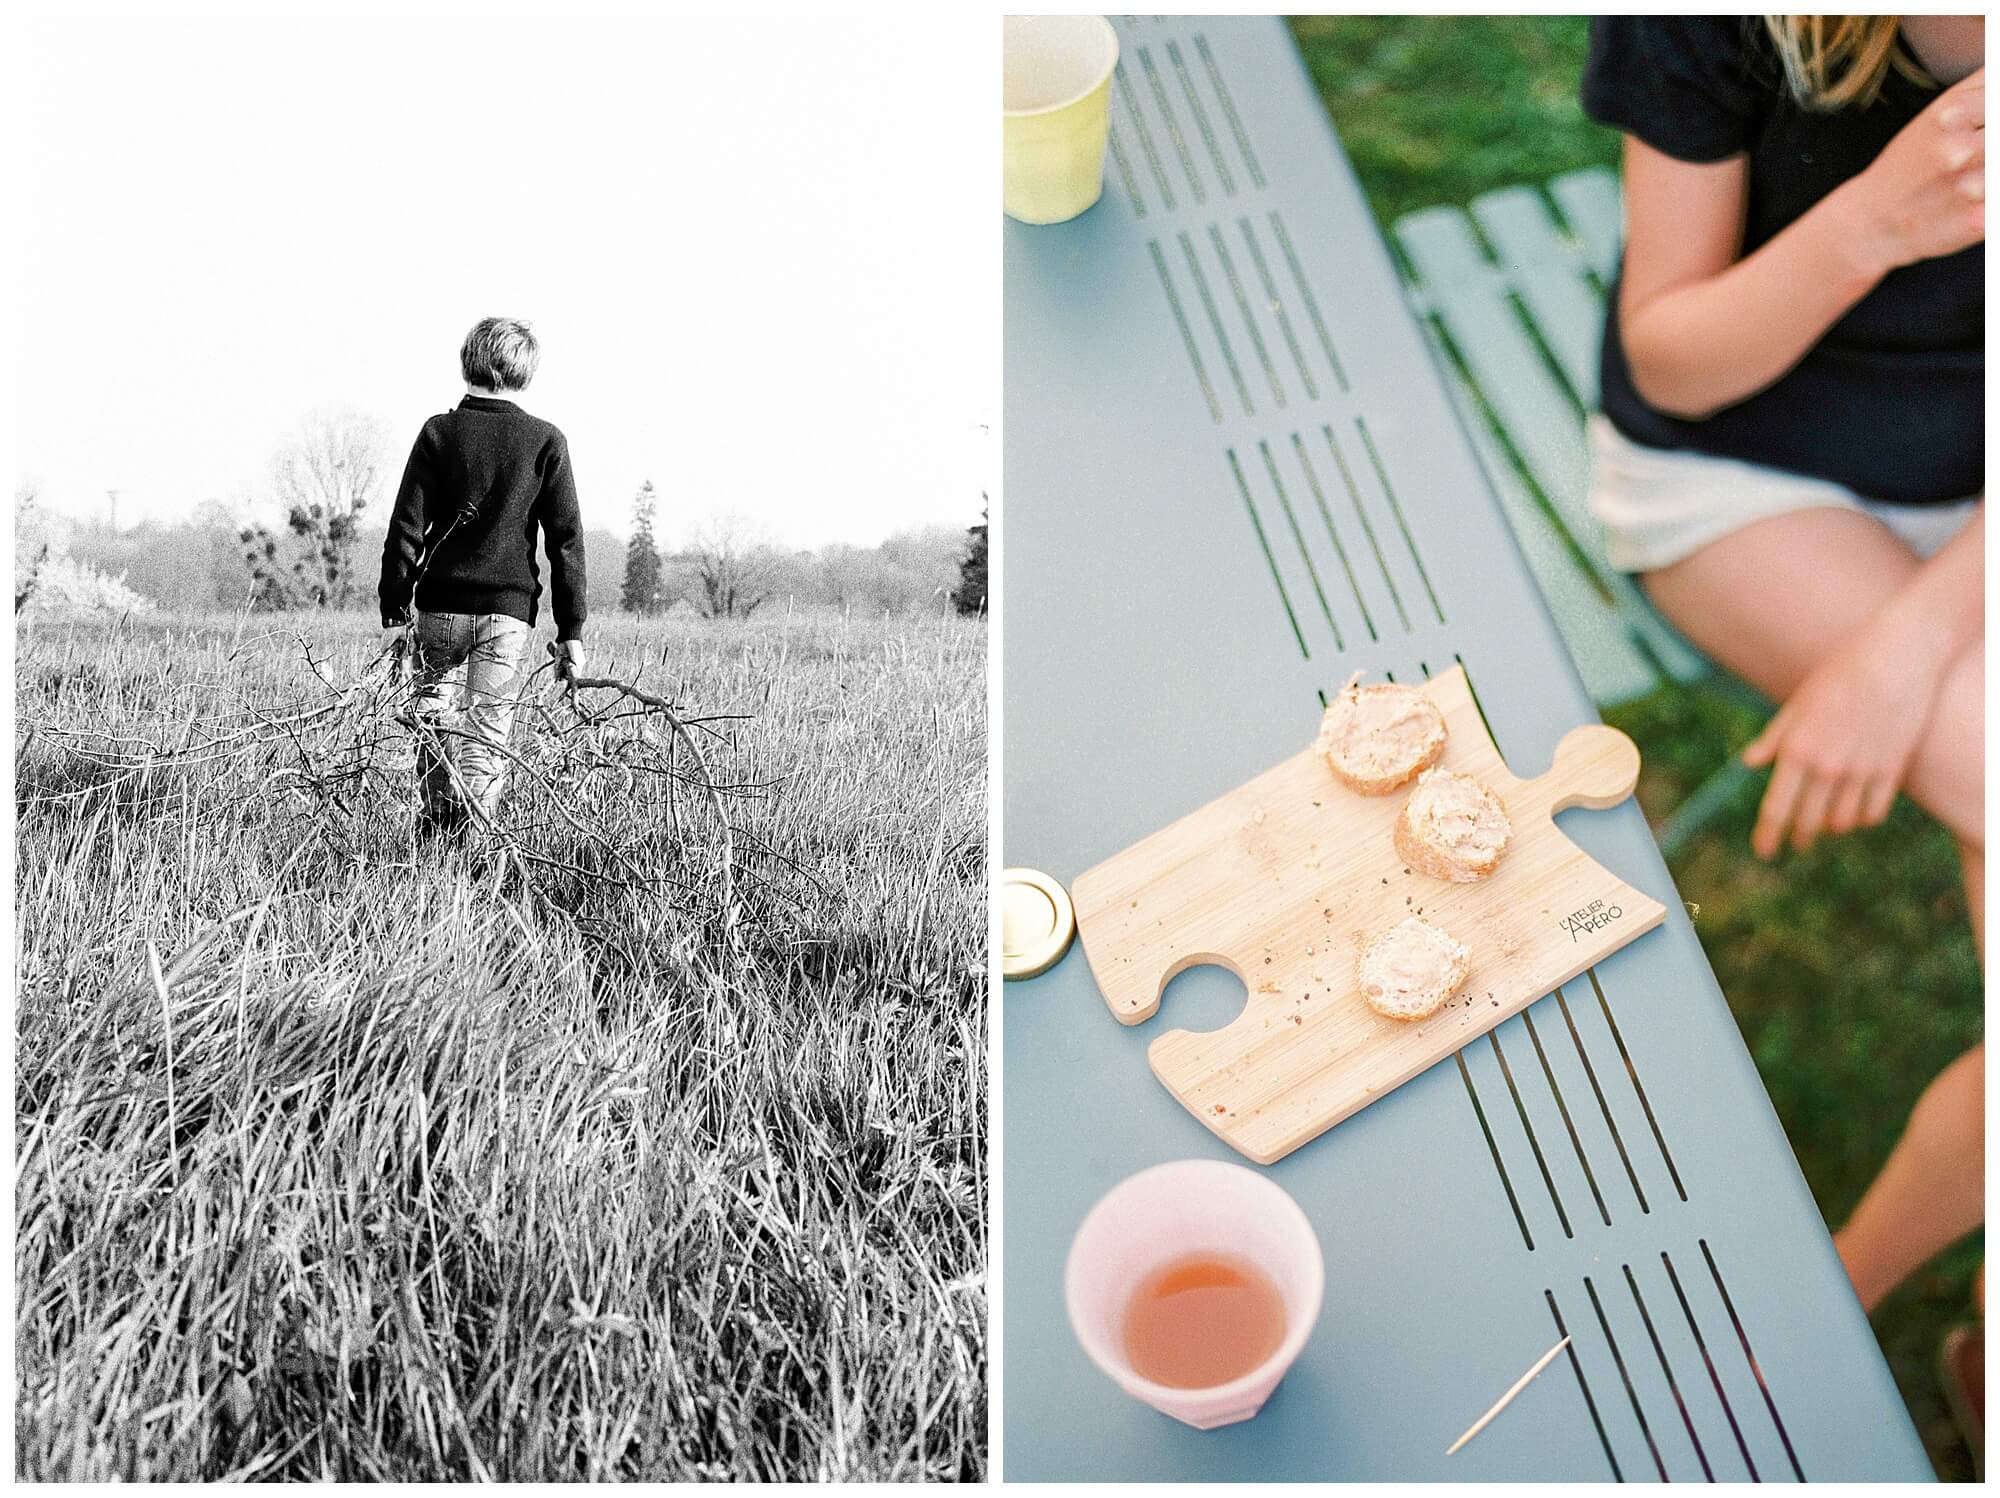 Left: A young French boy drags two large tree branches behind him through an overgrown field in the countryside. Right: The garden table is strewn with cups of apple juice and a plank of break and rillettes.